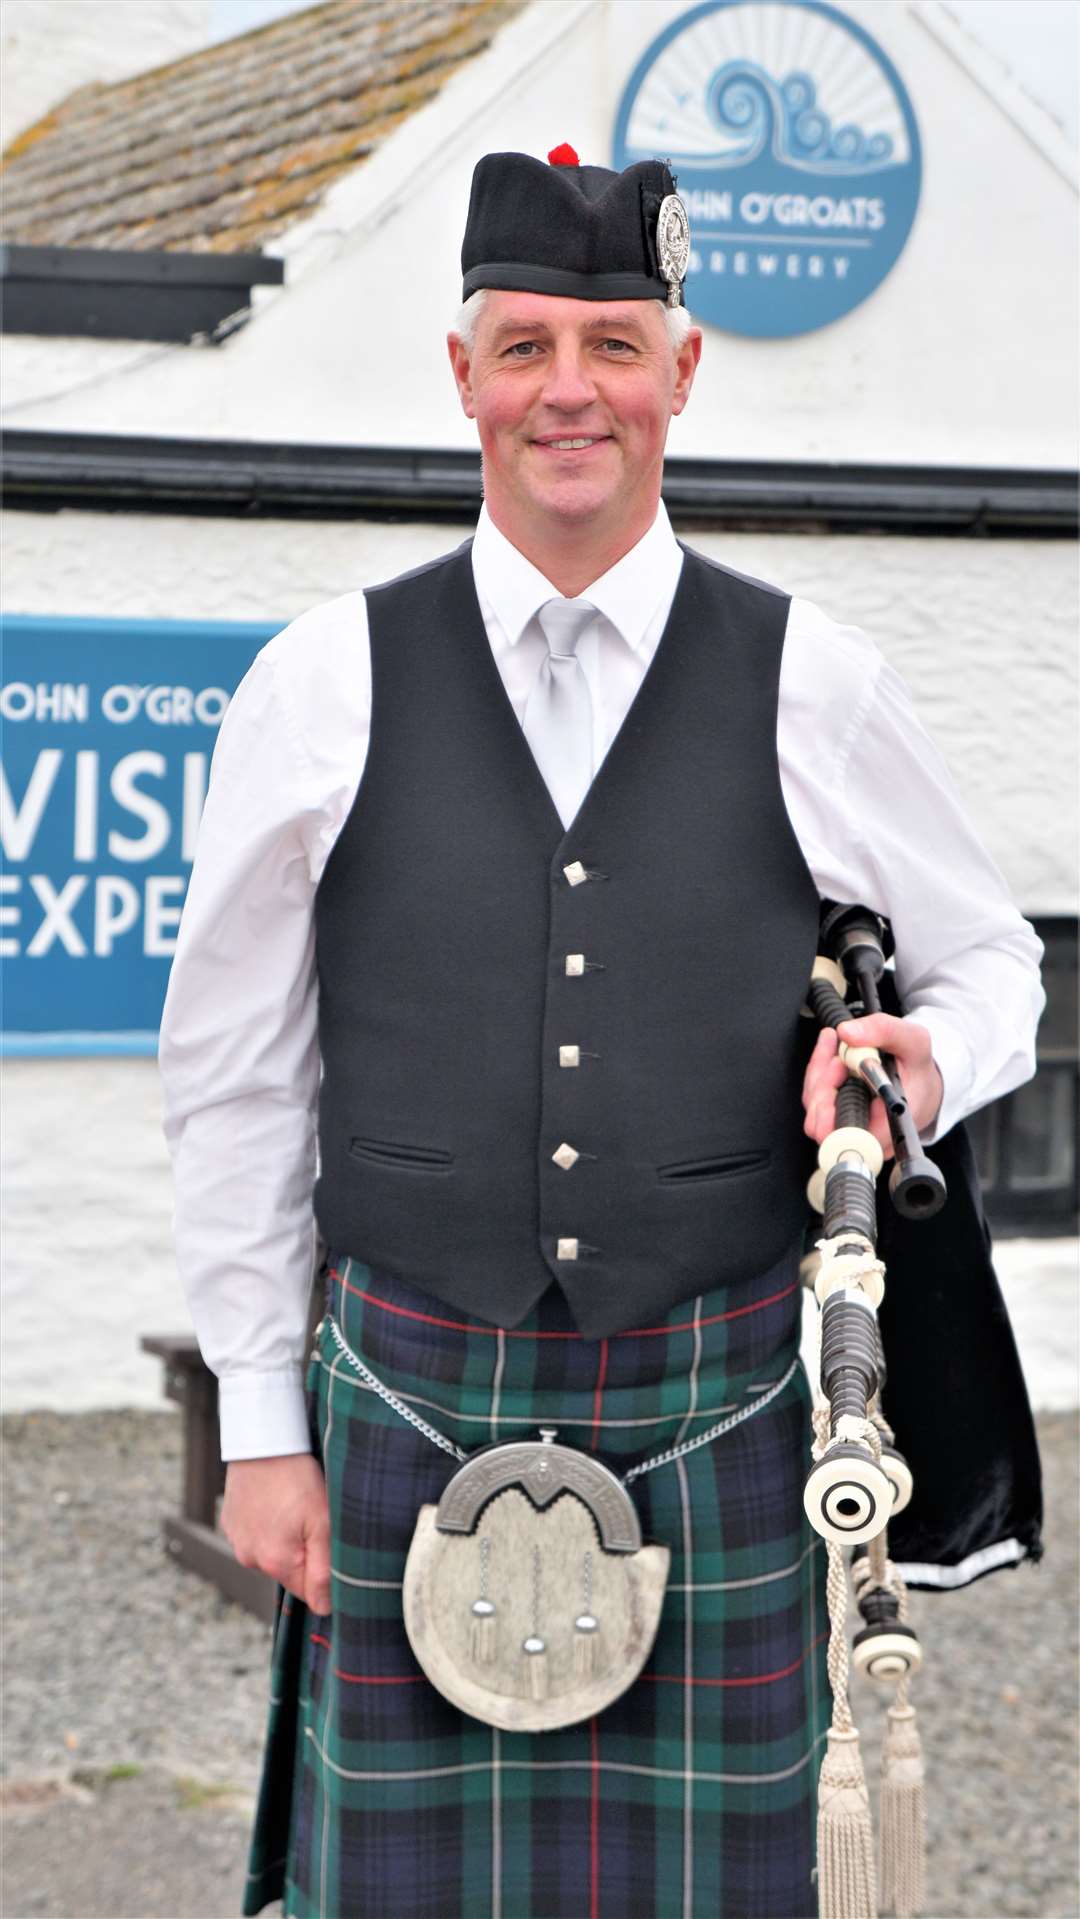 Colin Mackay, convenor of Wick Pipe Band, was delighted to get back playing his bagpipes to welcome the Riders of Charity. He played Scotland the Brave, Rowan Tree and Bonnie Galloway.